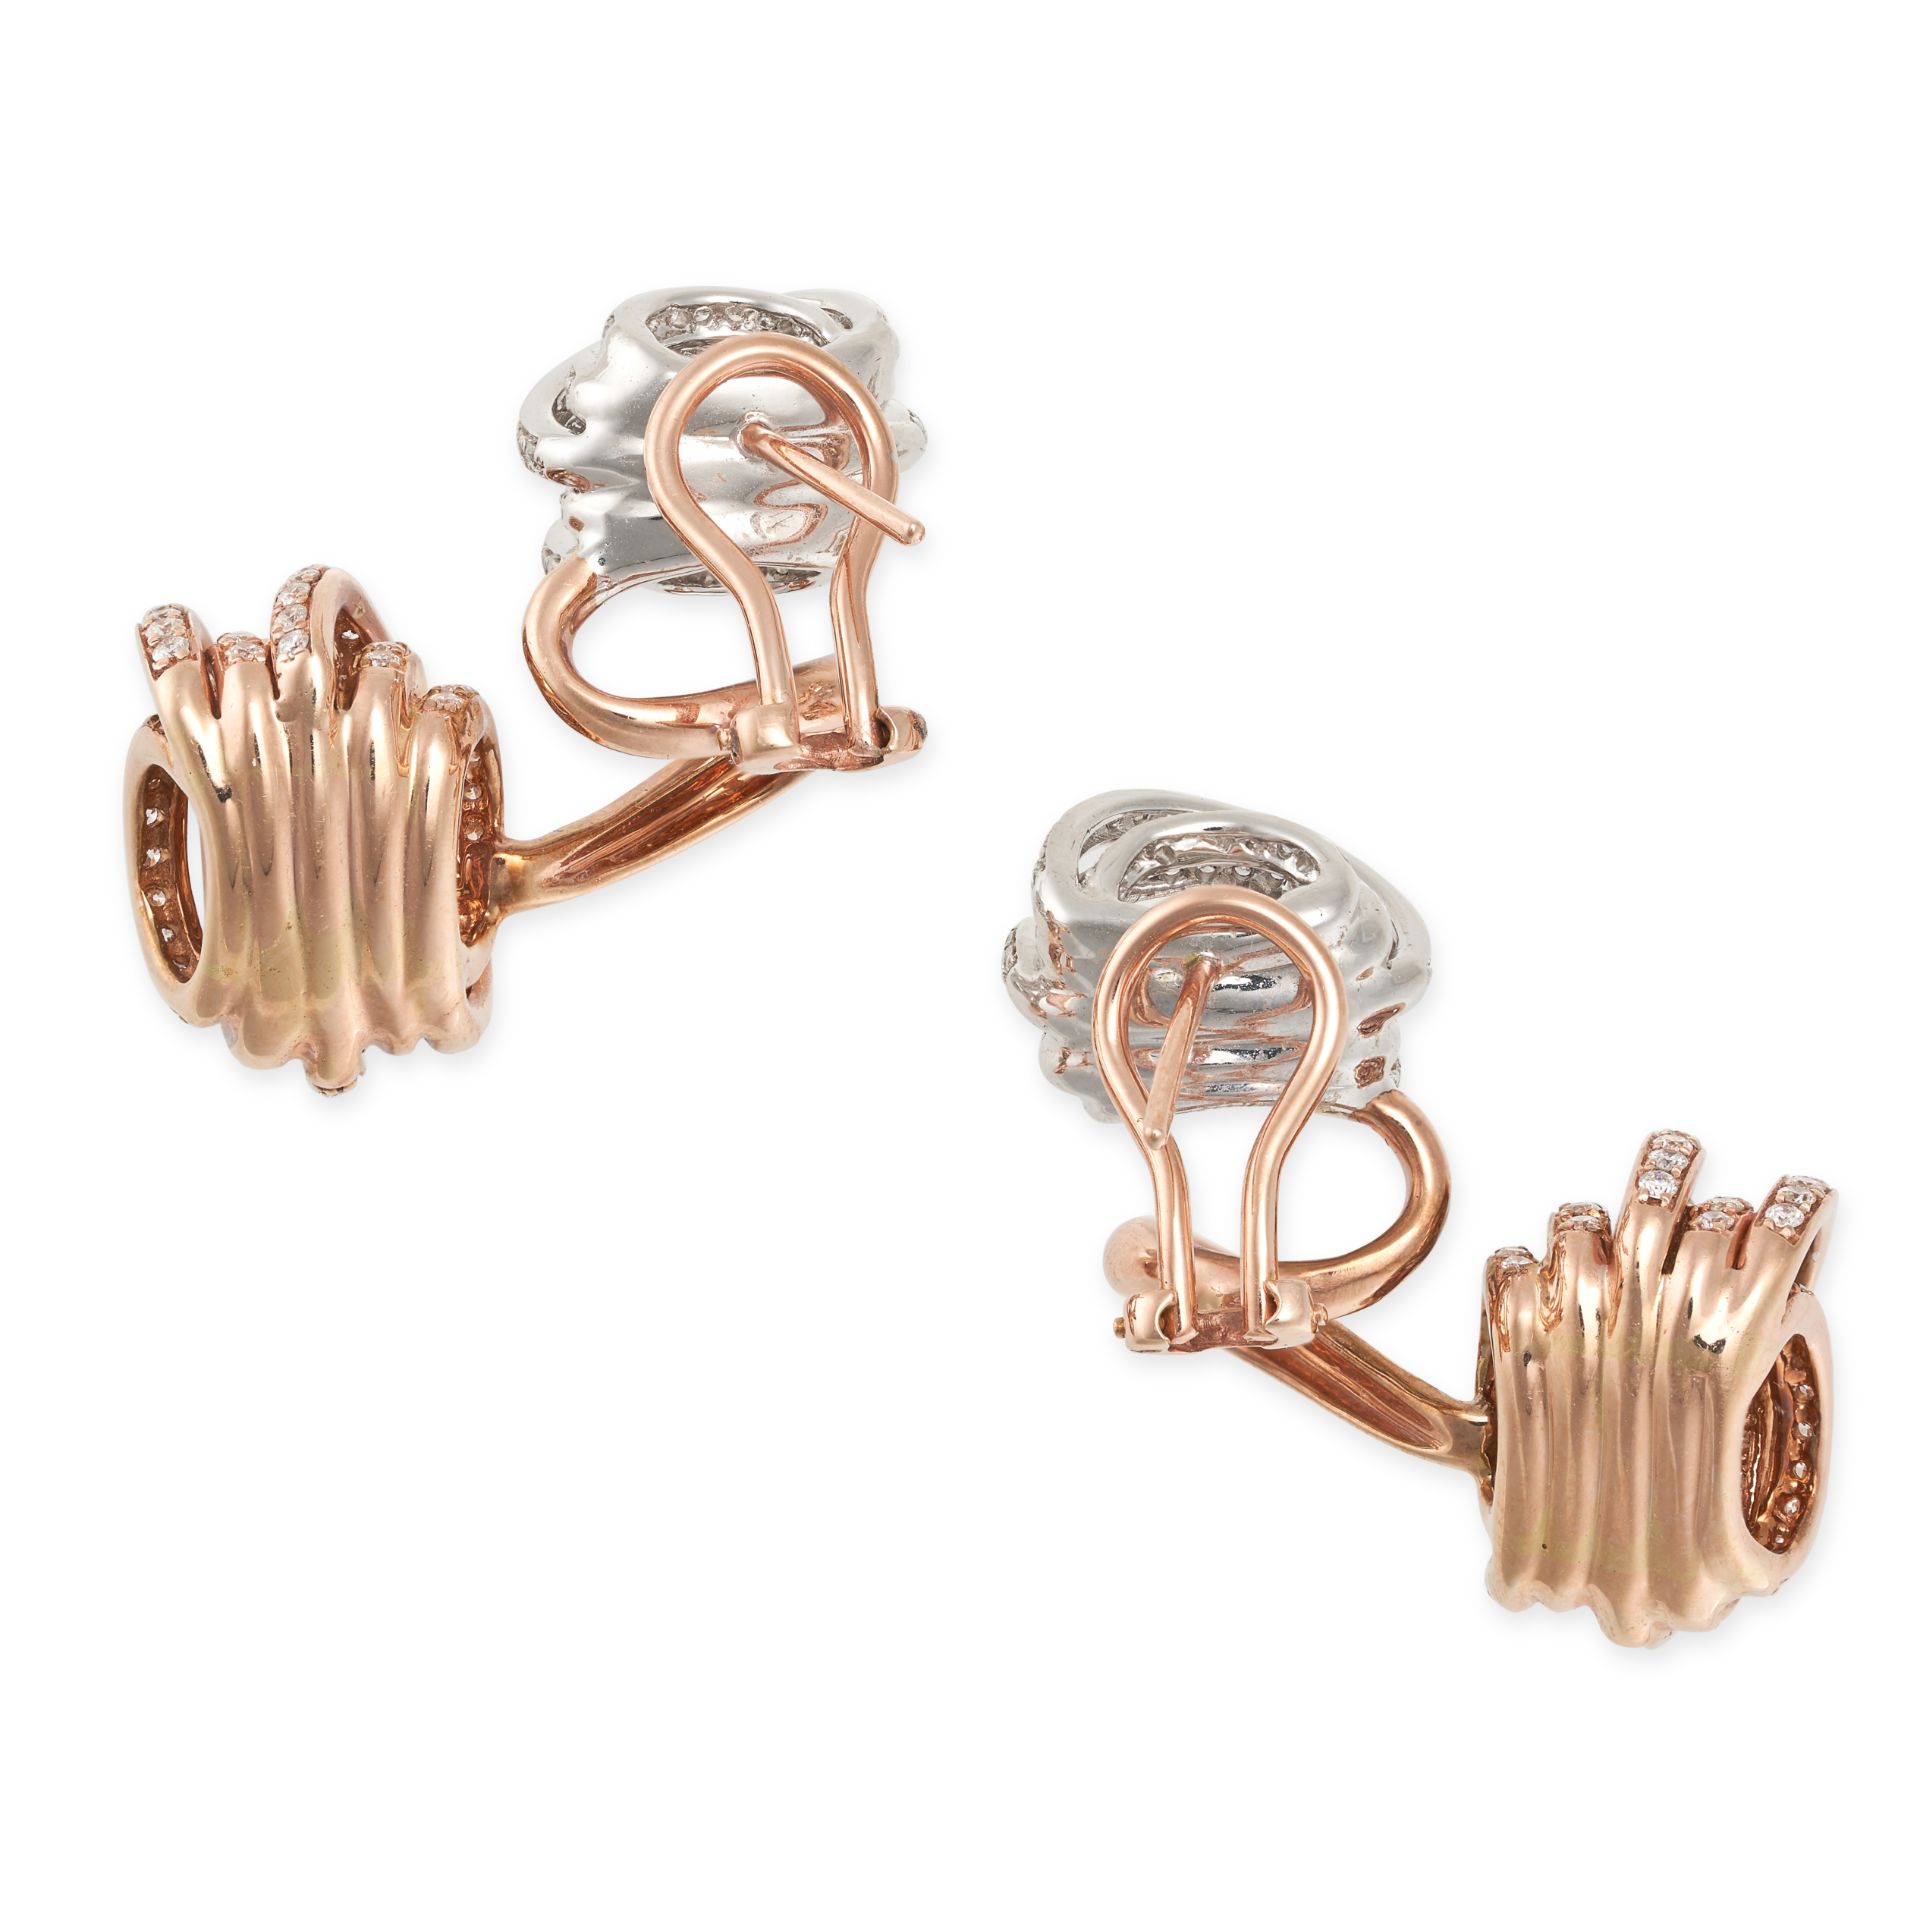 A PAIR OF DIAMOND EARRINGS in 18ct white and rose gold, comprising two sections set with seven ba...